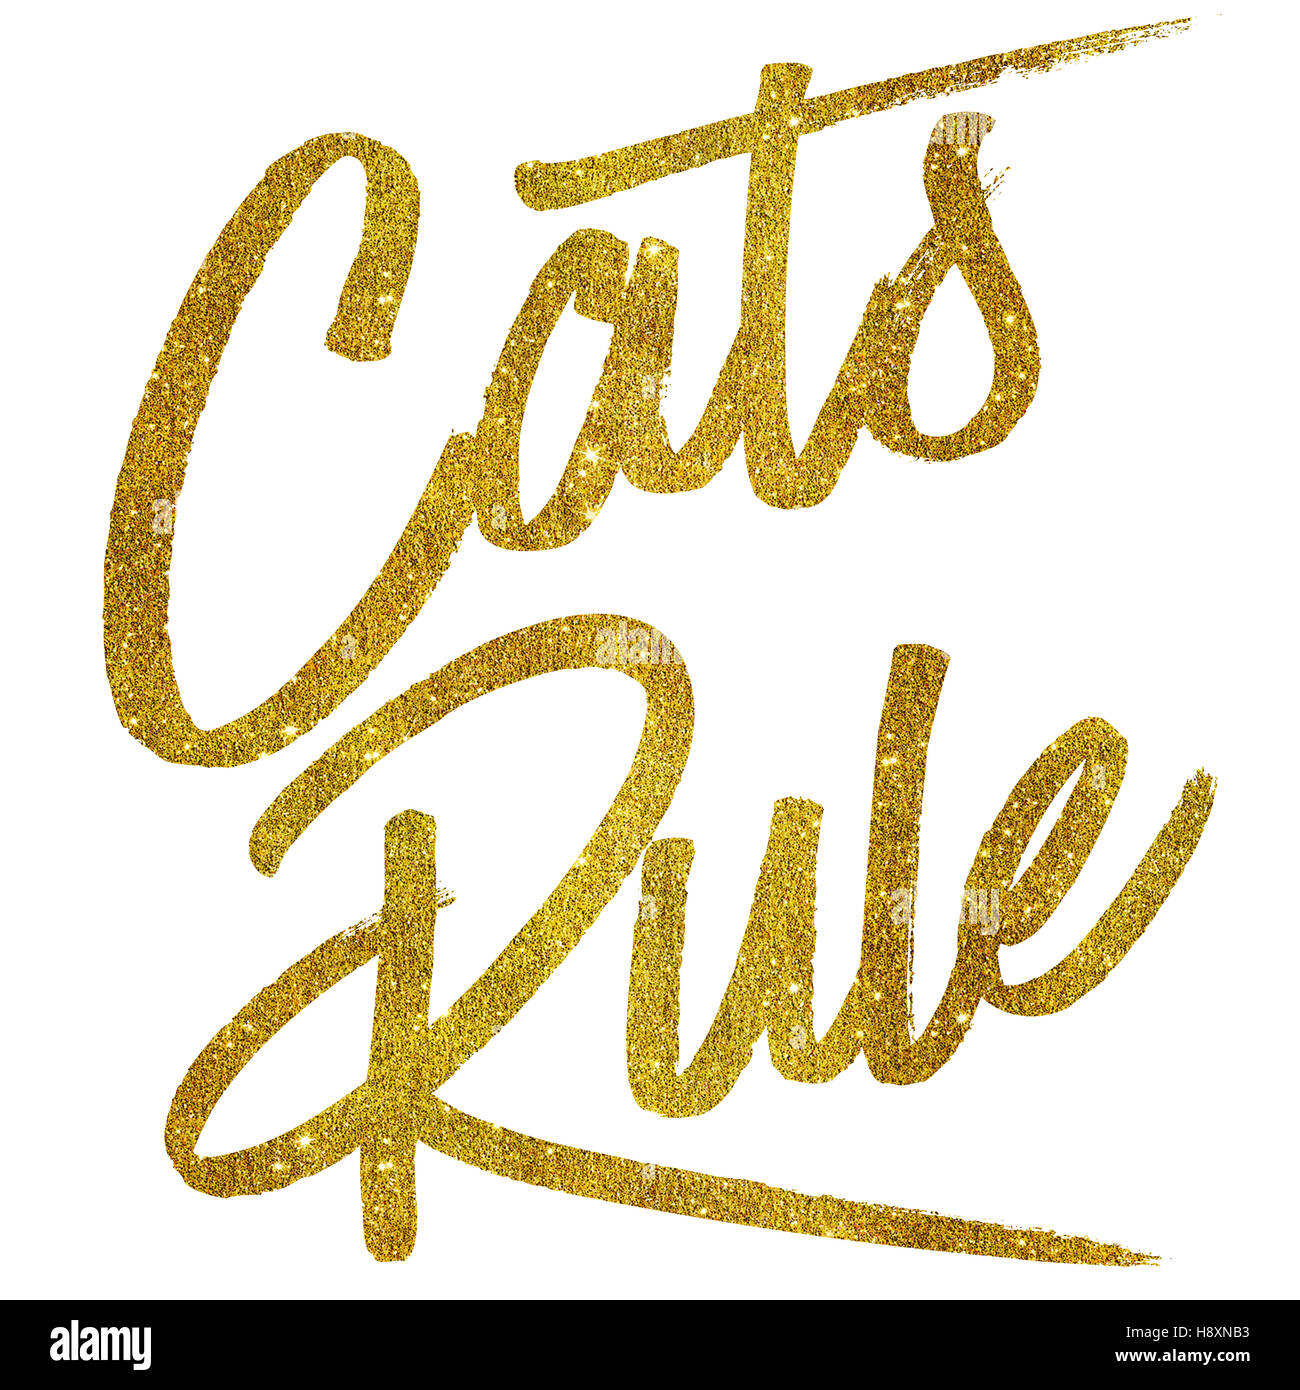 Cats Rule Gold Faux Foil Metallic Glitter Quote Isolated Stock Photo